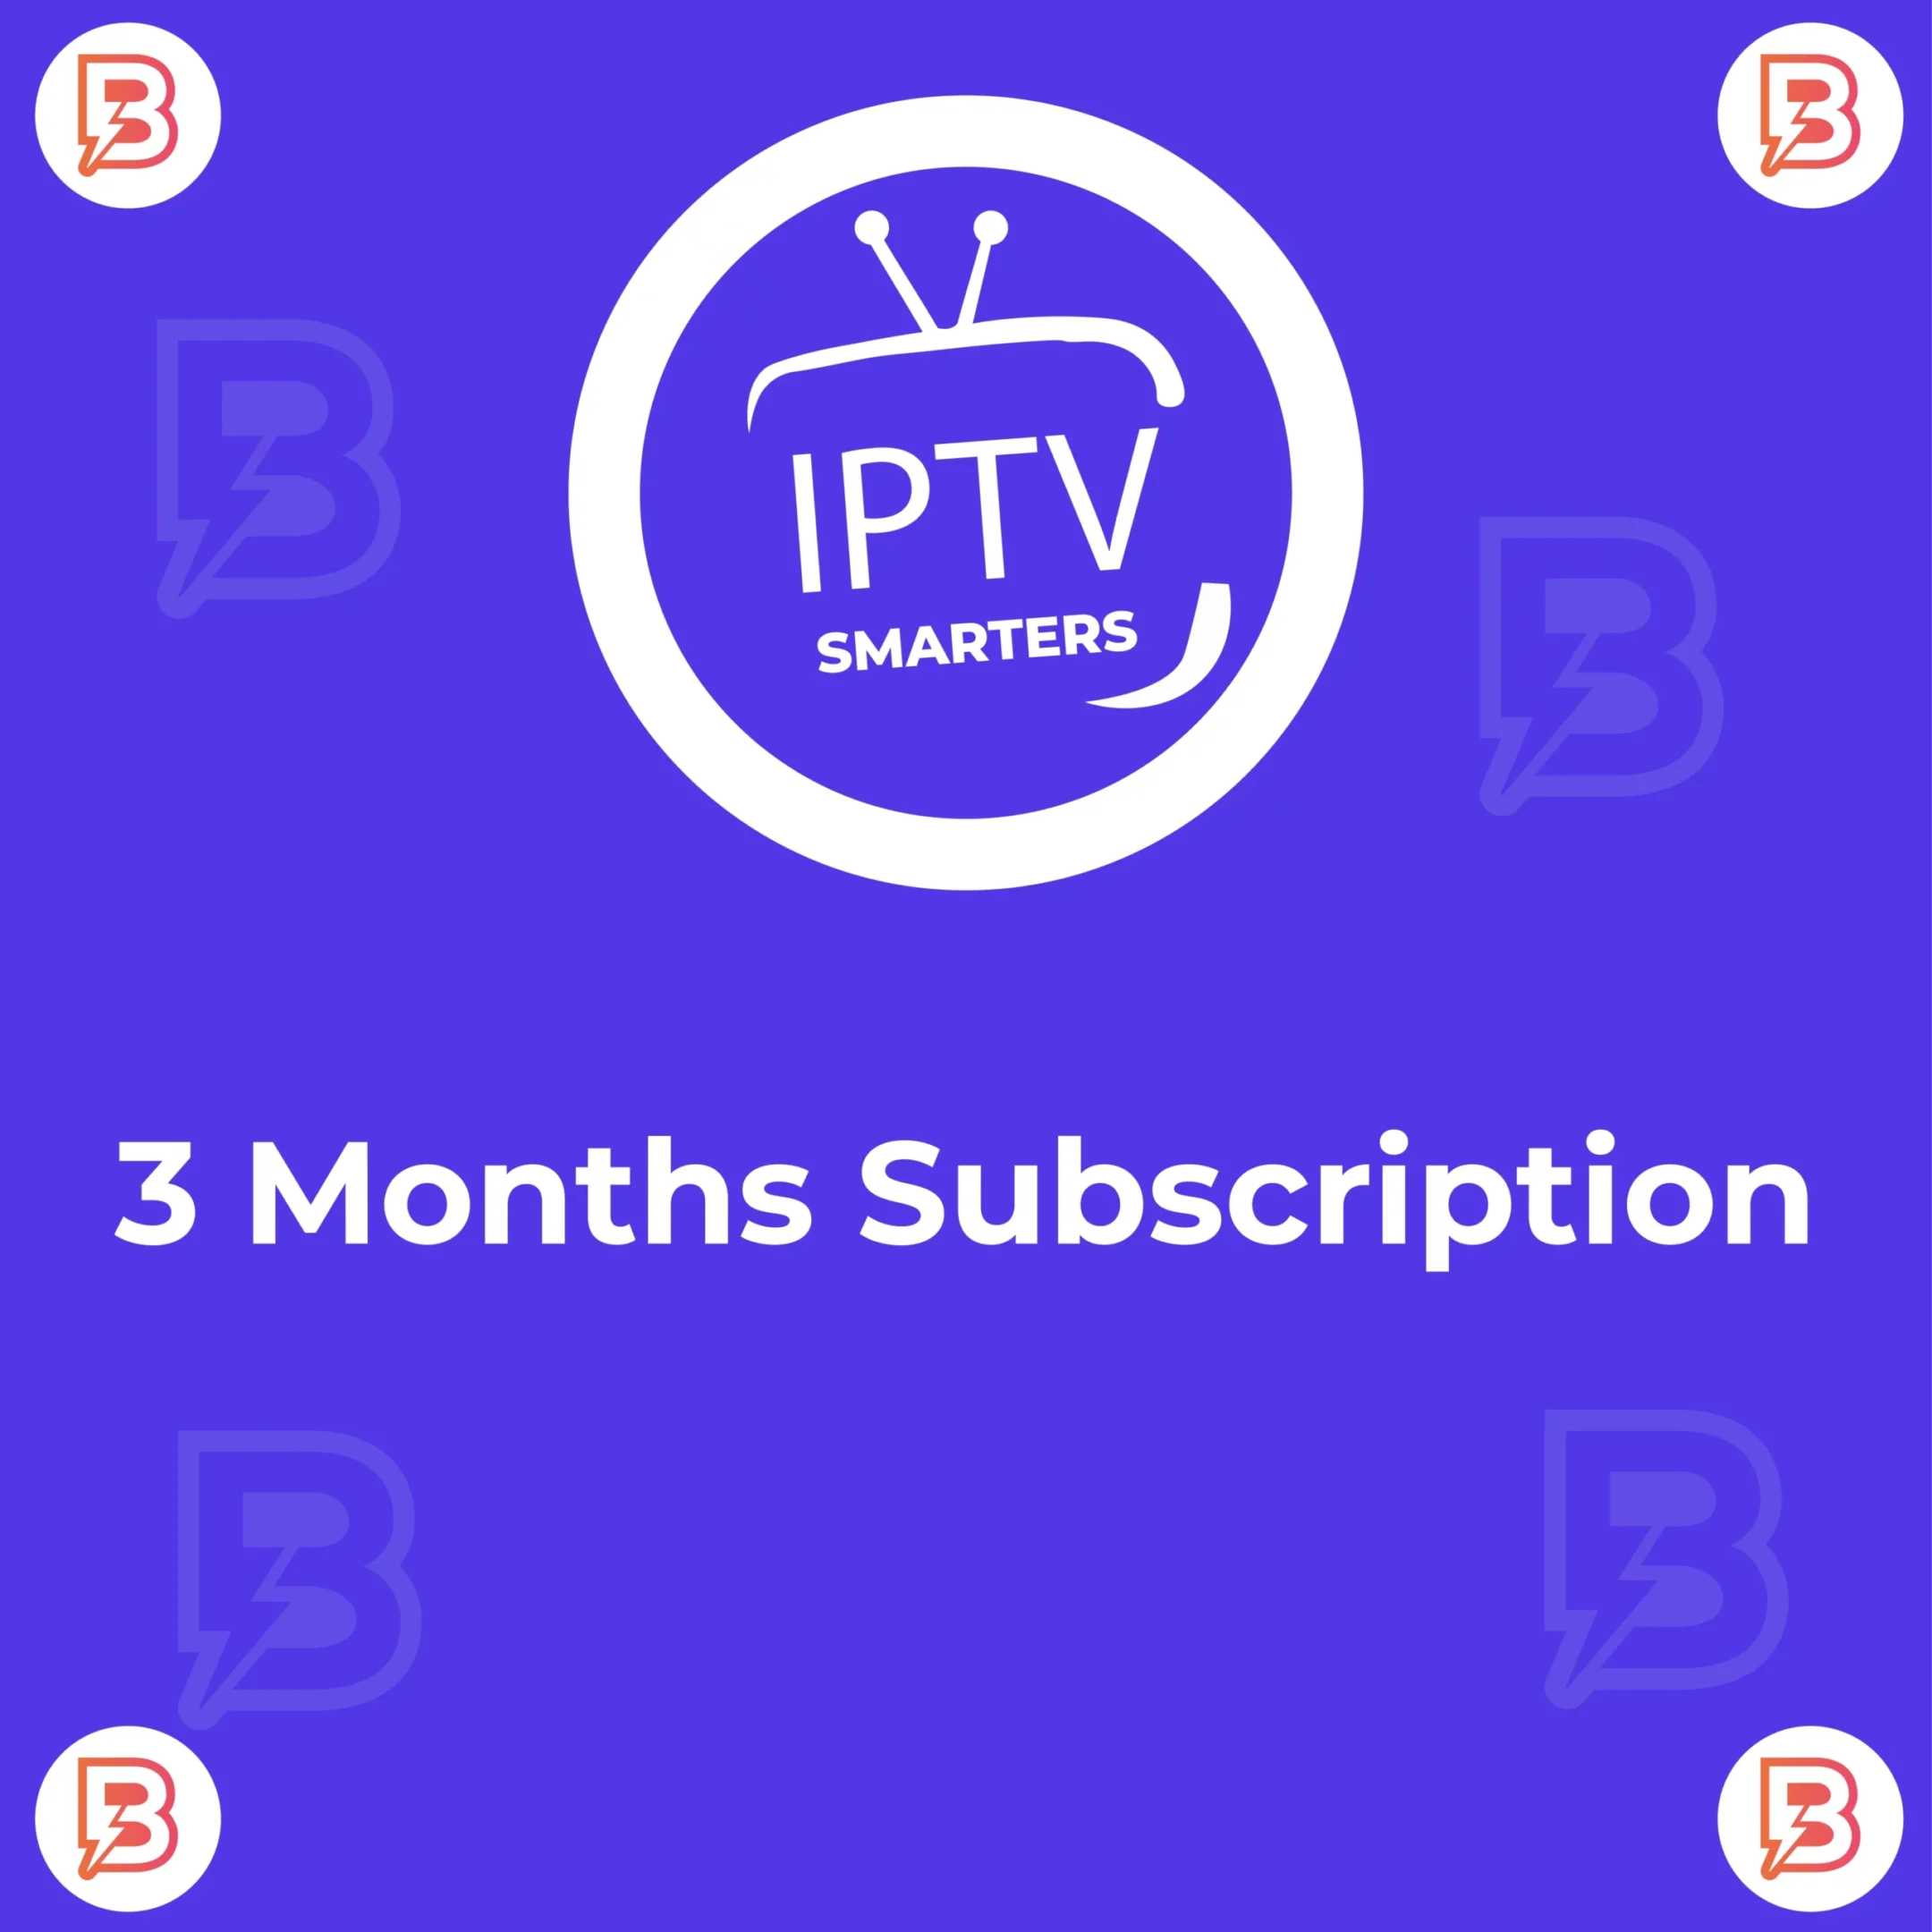 Buy 3 Months Subscription